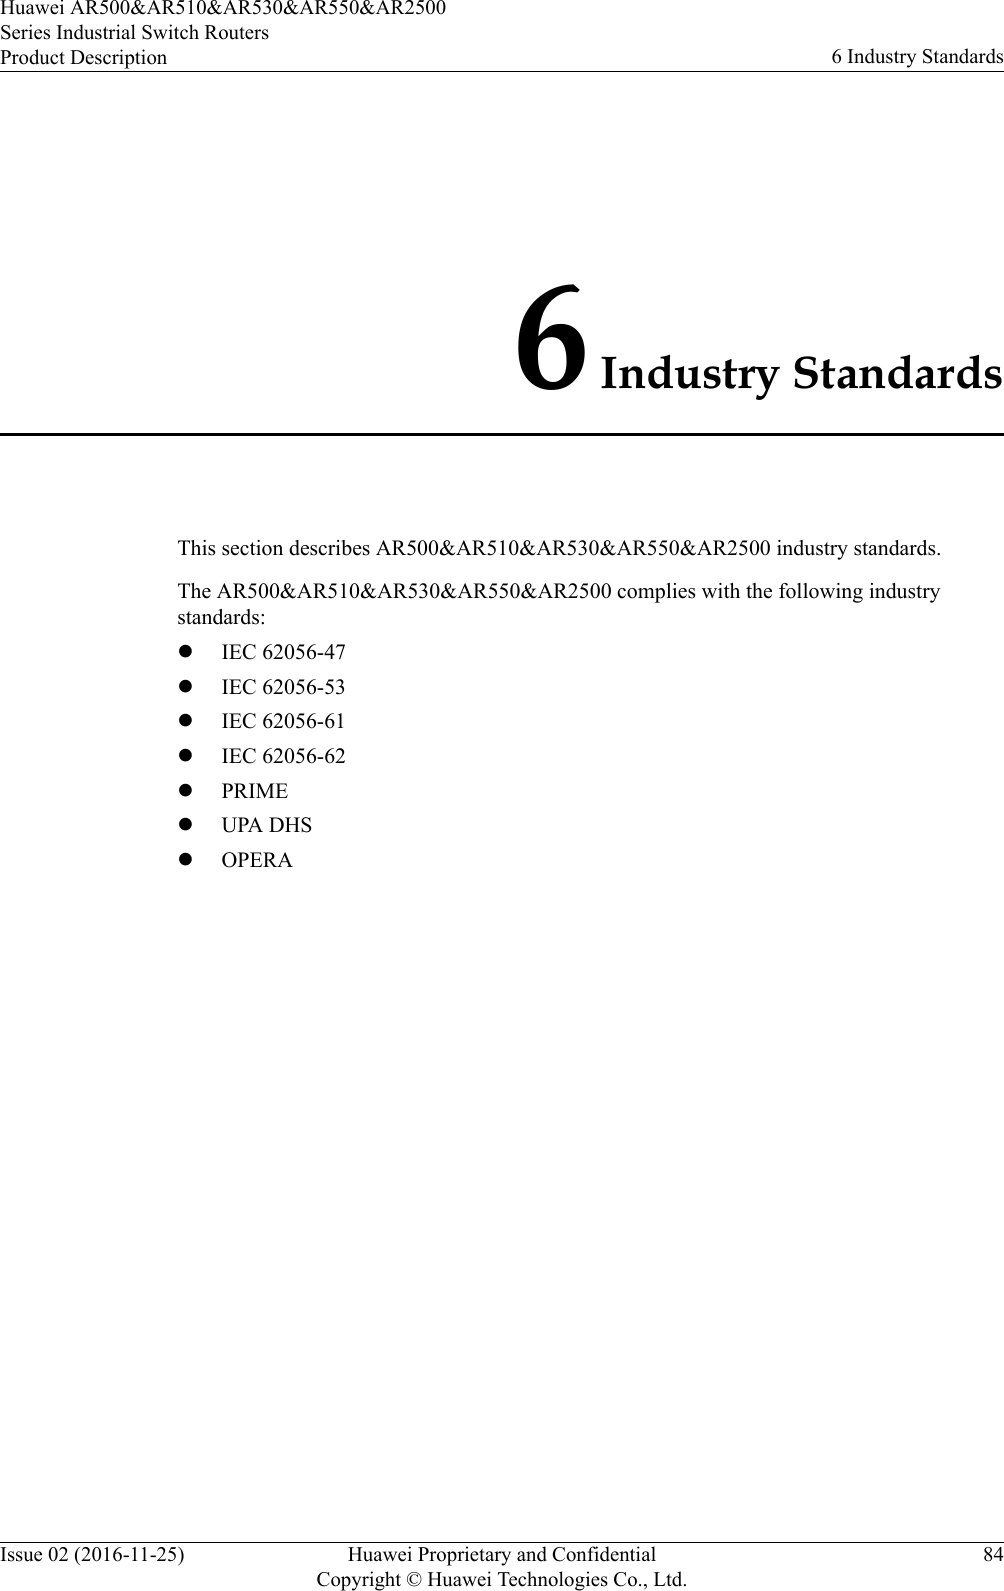 6 Industry StandardsThis section describes AR500&amp;AR510&amp;AR530&amp;AR550&amp;AR2500 industry standards.The AR500&amp;AR510&amp;AR530&amp;AR550&amp;AR2500 complies with the following industrystandards:lIEC 62056-47lIEC 62056-53lIEC 62056-61lIEC 62056-62lPRIMElUPA DHSlOPERAHuawei AR500&amp;AR510&amp;AR530&amp;AR550&amp;AR2500Series Industrial Switch RoutersProduct Description 6 Industry StandardsIssue 02 (2016-11-25) Huawei Proprietary and ConfidentialCopyright © Huawei Technologies Co., Ltd.84